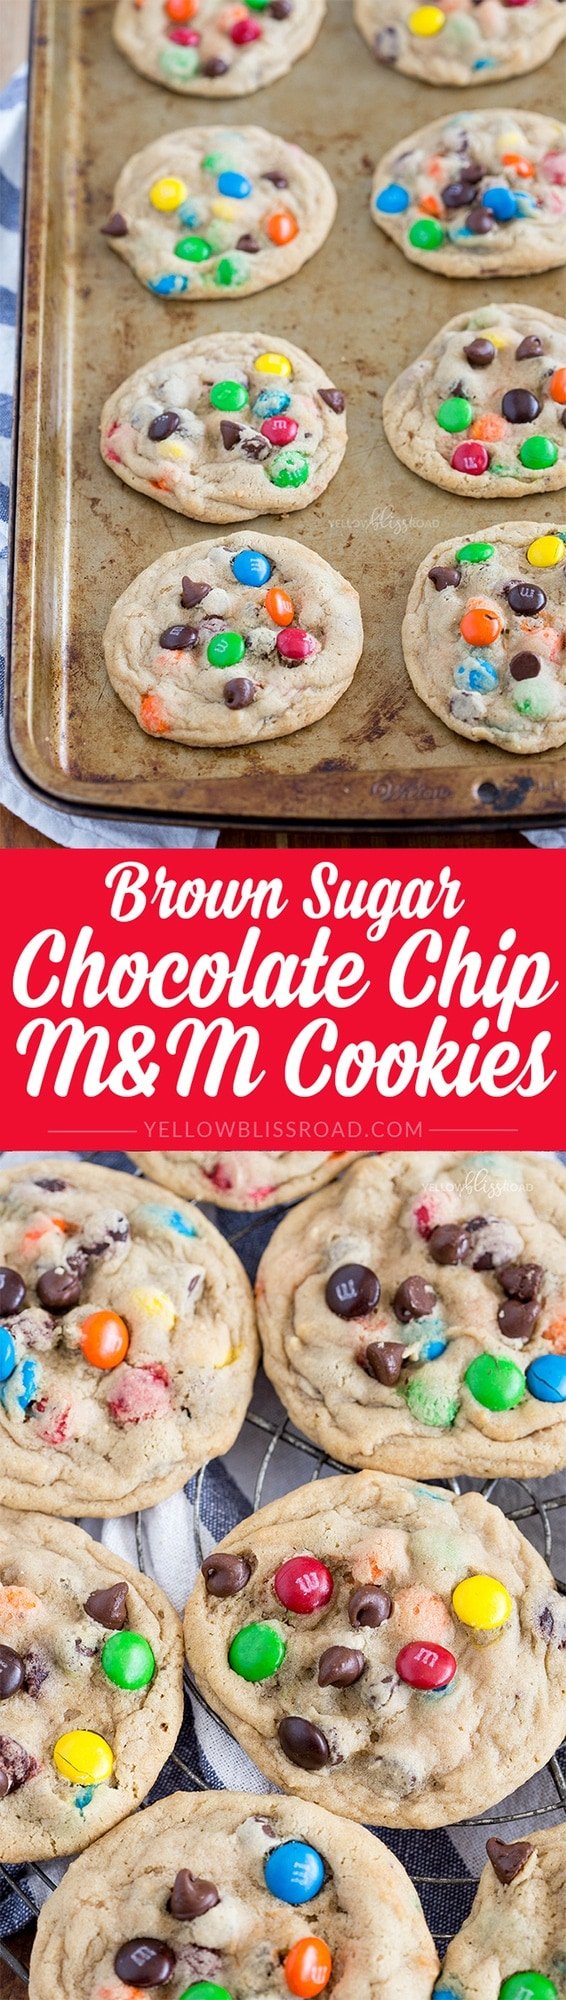 These Giant Chocolate Chip Cookies with M&Ms are loaded with chocolate and super soft and chewy. They are destined to be your new favorite!